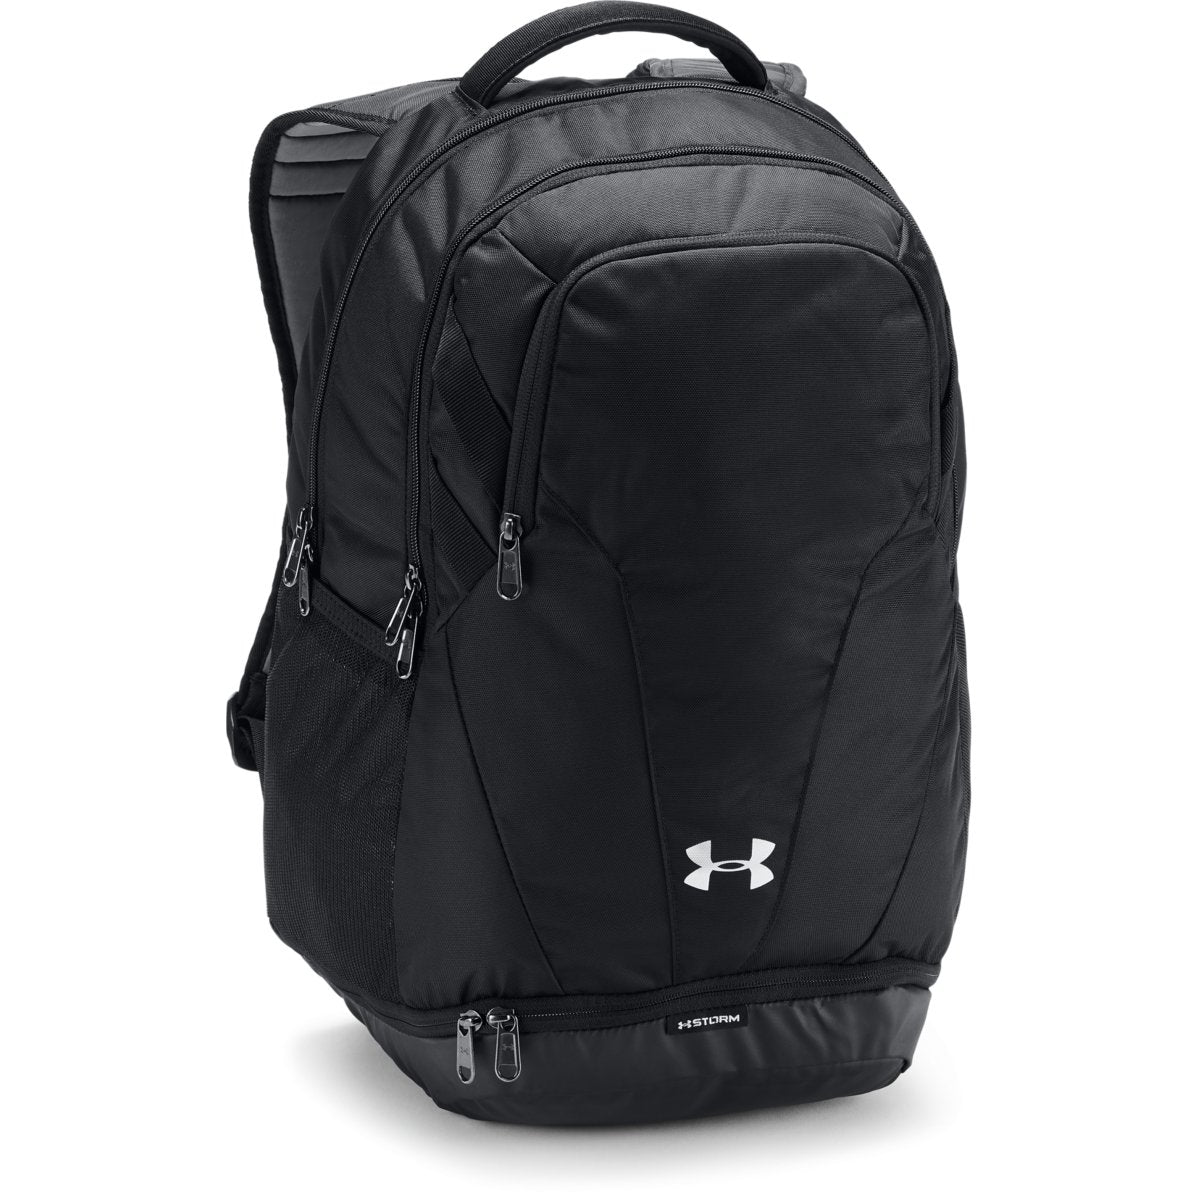 Under Armour Storm Backpack - Black/Gray